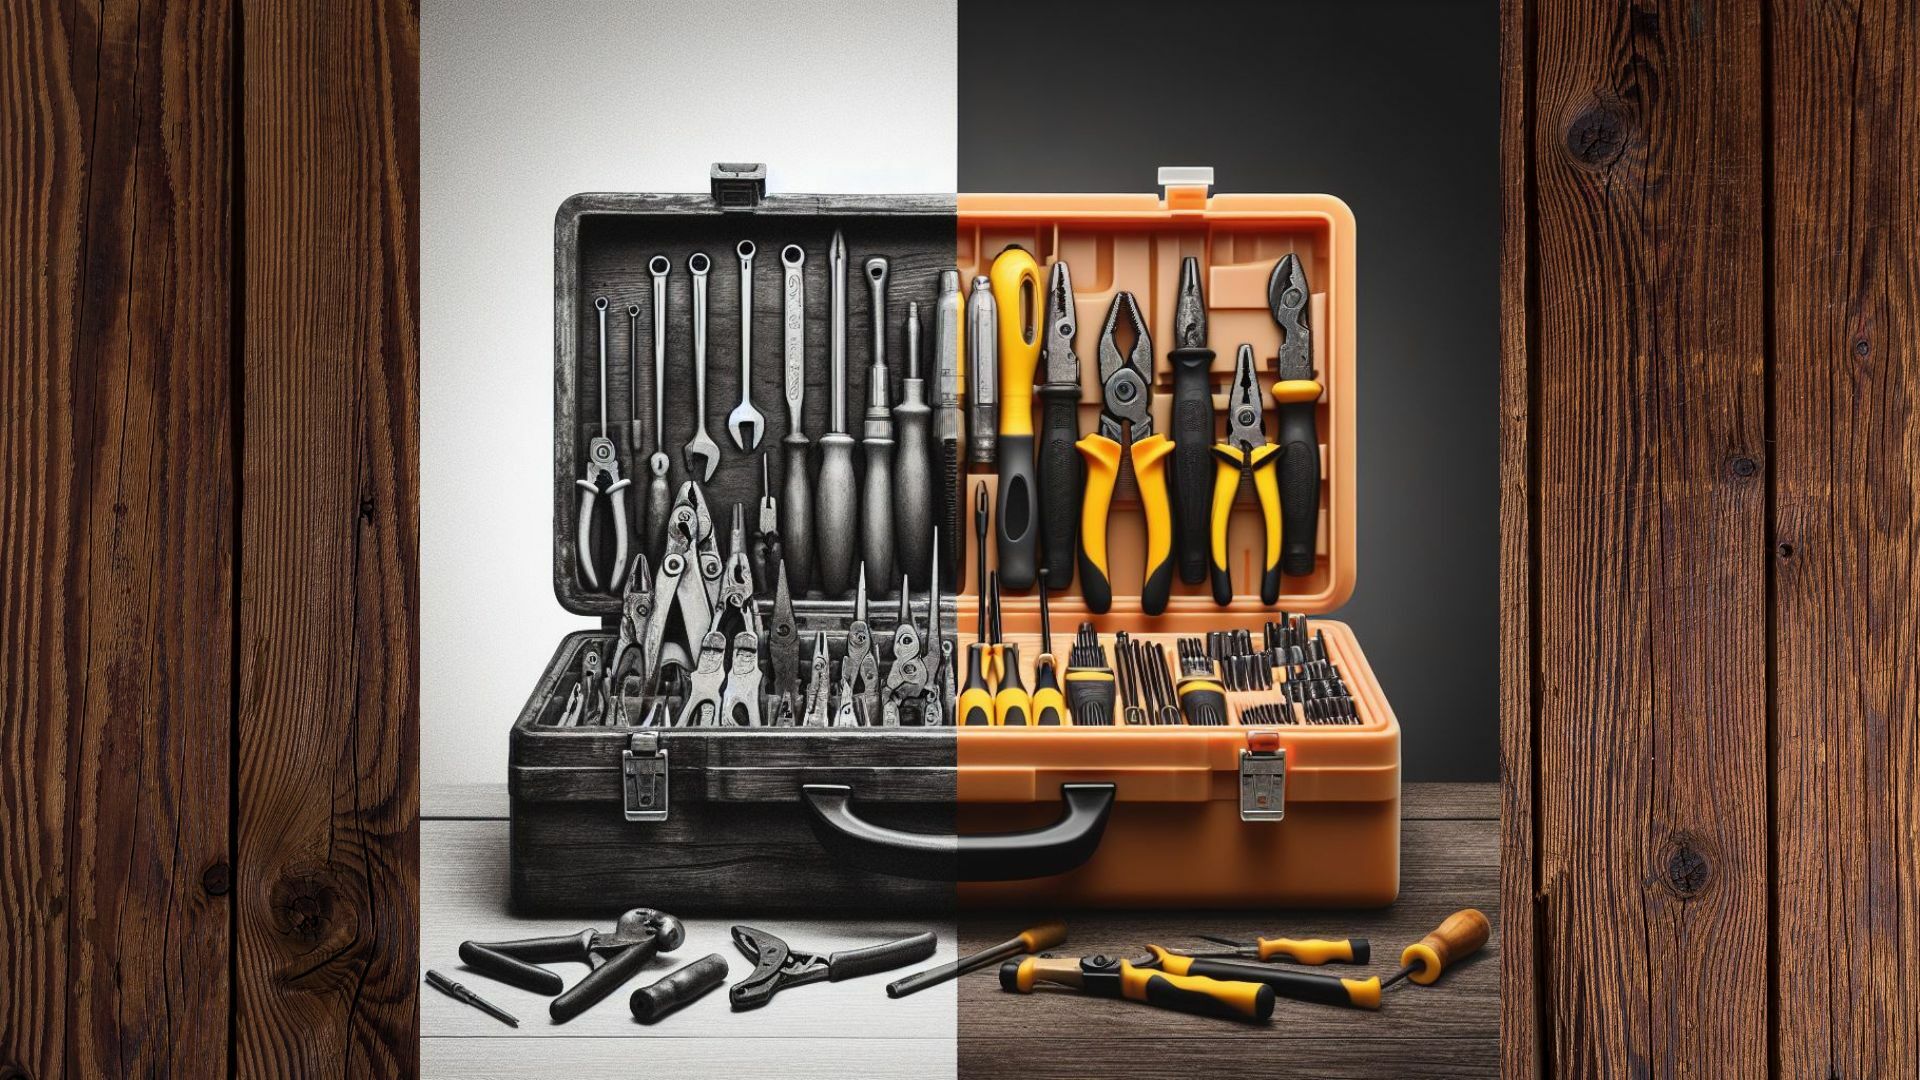 The evolution of Insulated Hand Tools history and development